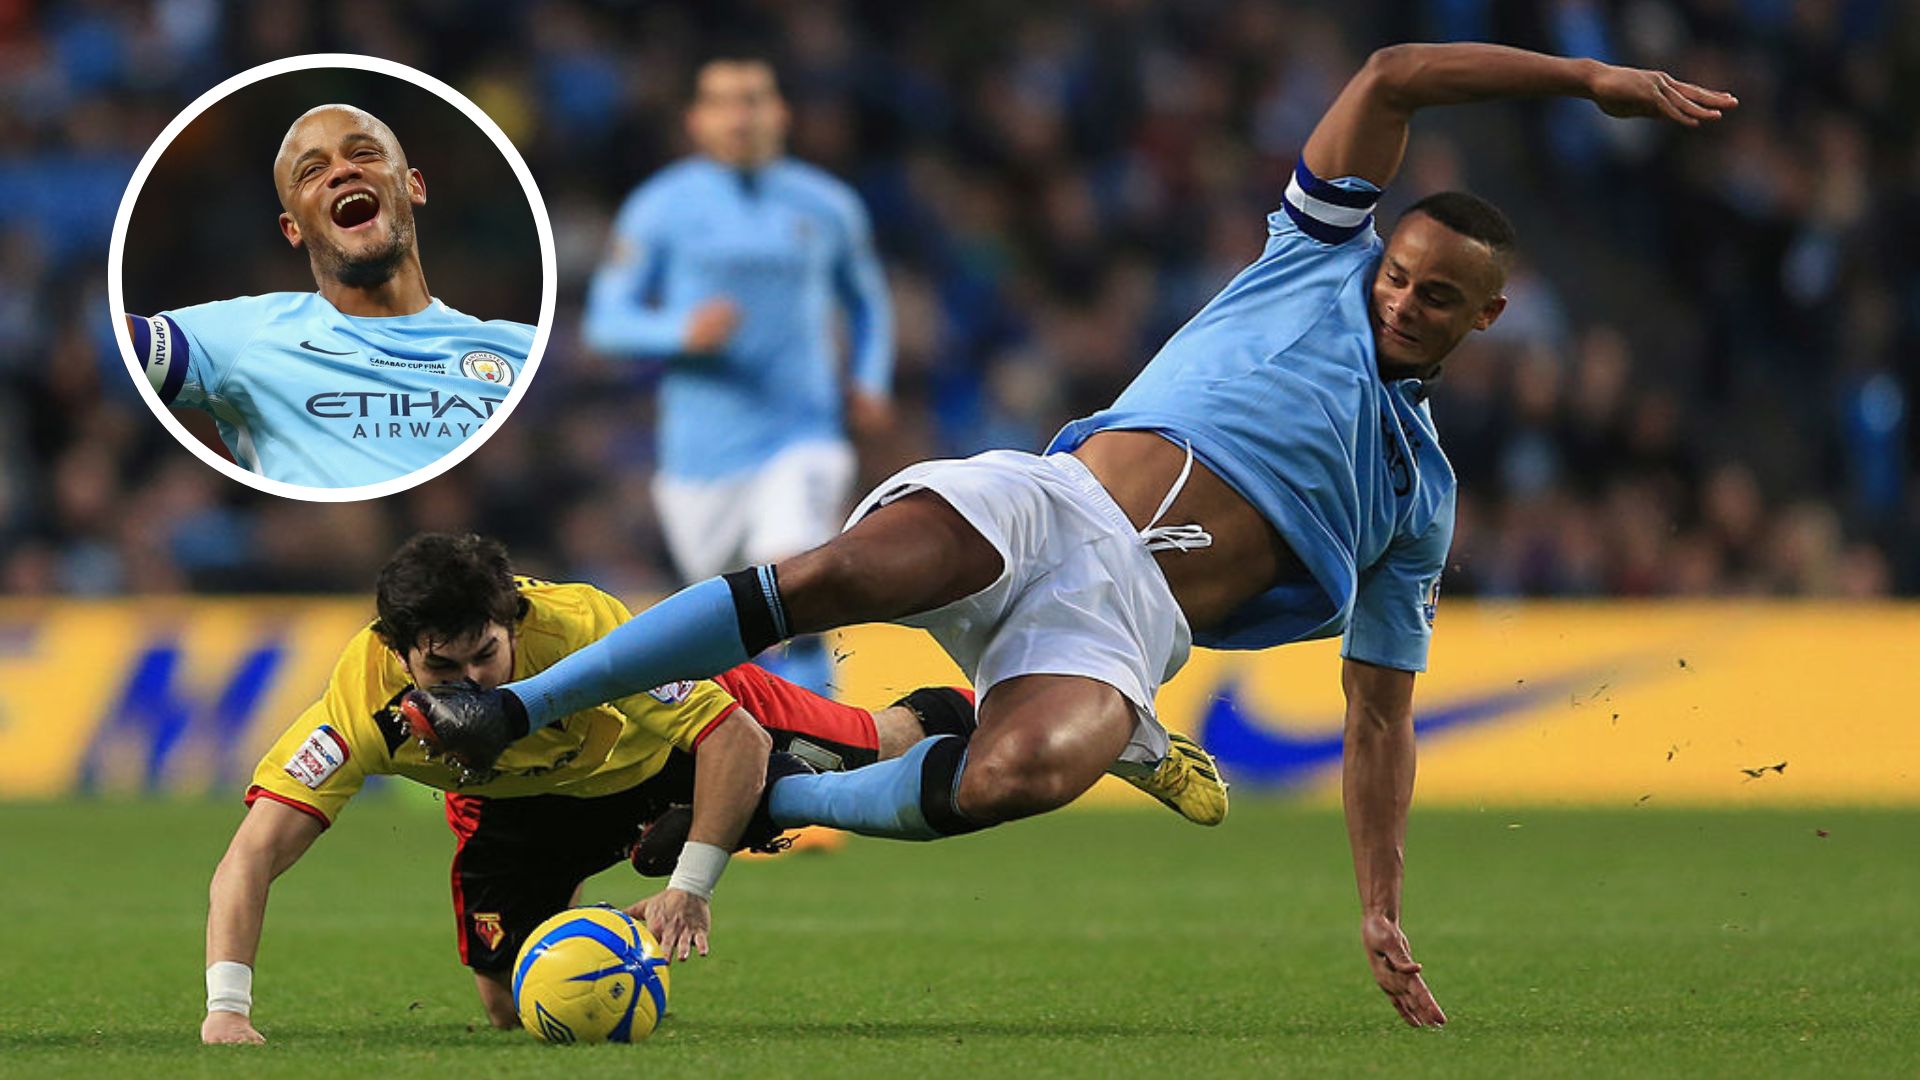 ‘One of the most aggressive players I’ve played with’: How Vincent Kompany's actions set the tone at Manchester City